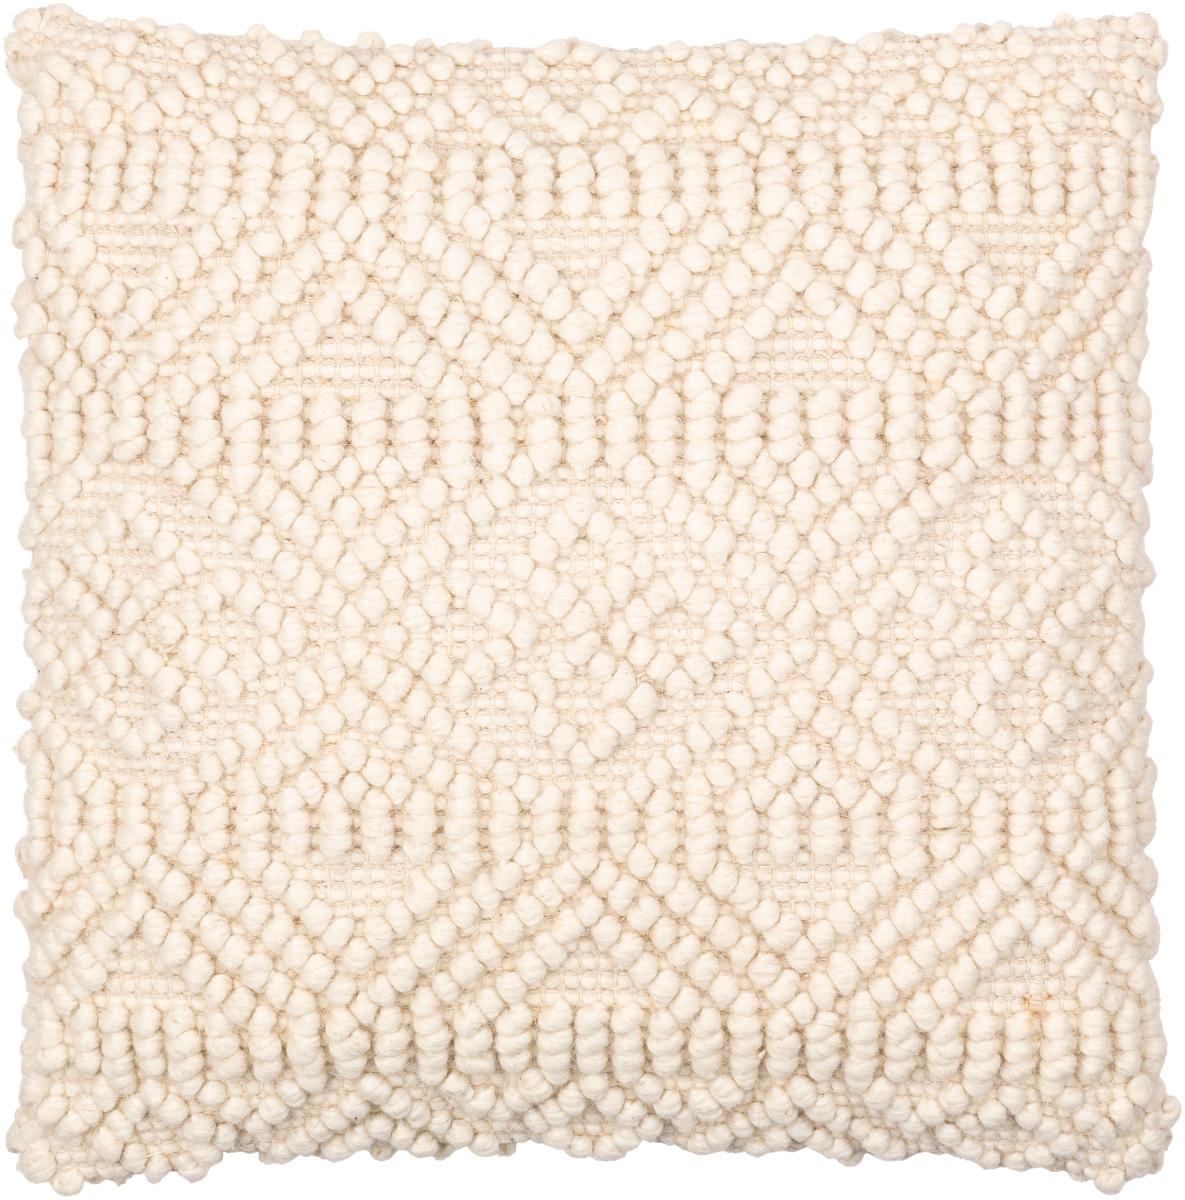 Picture of Livabliss HYG004-2020D 20 x 20 in. Hygge Square Pillow Cover, Cream - Down Insert